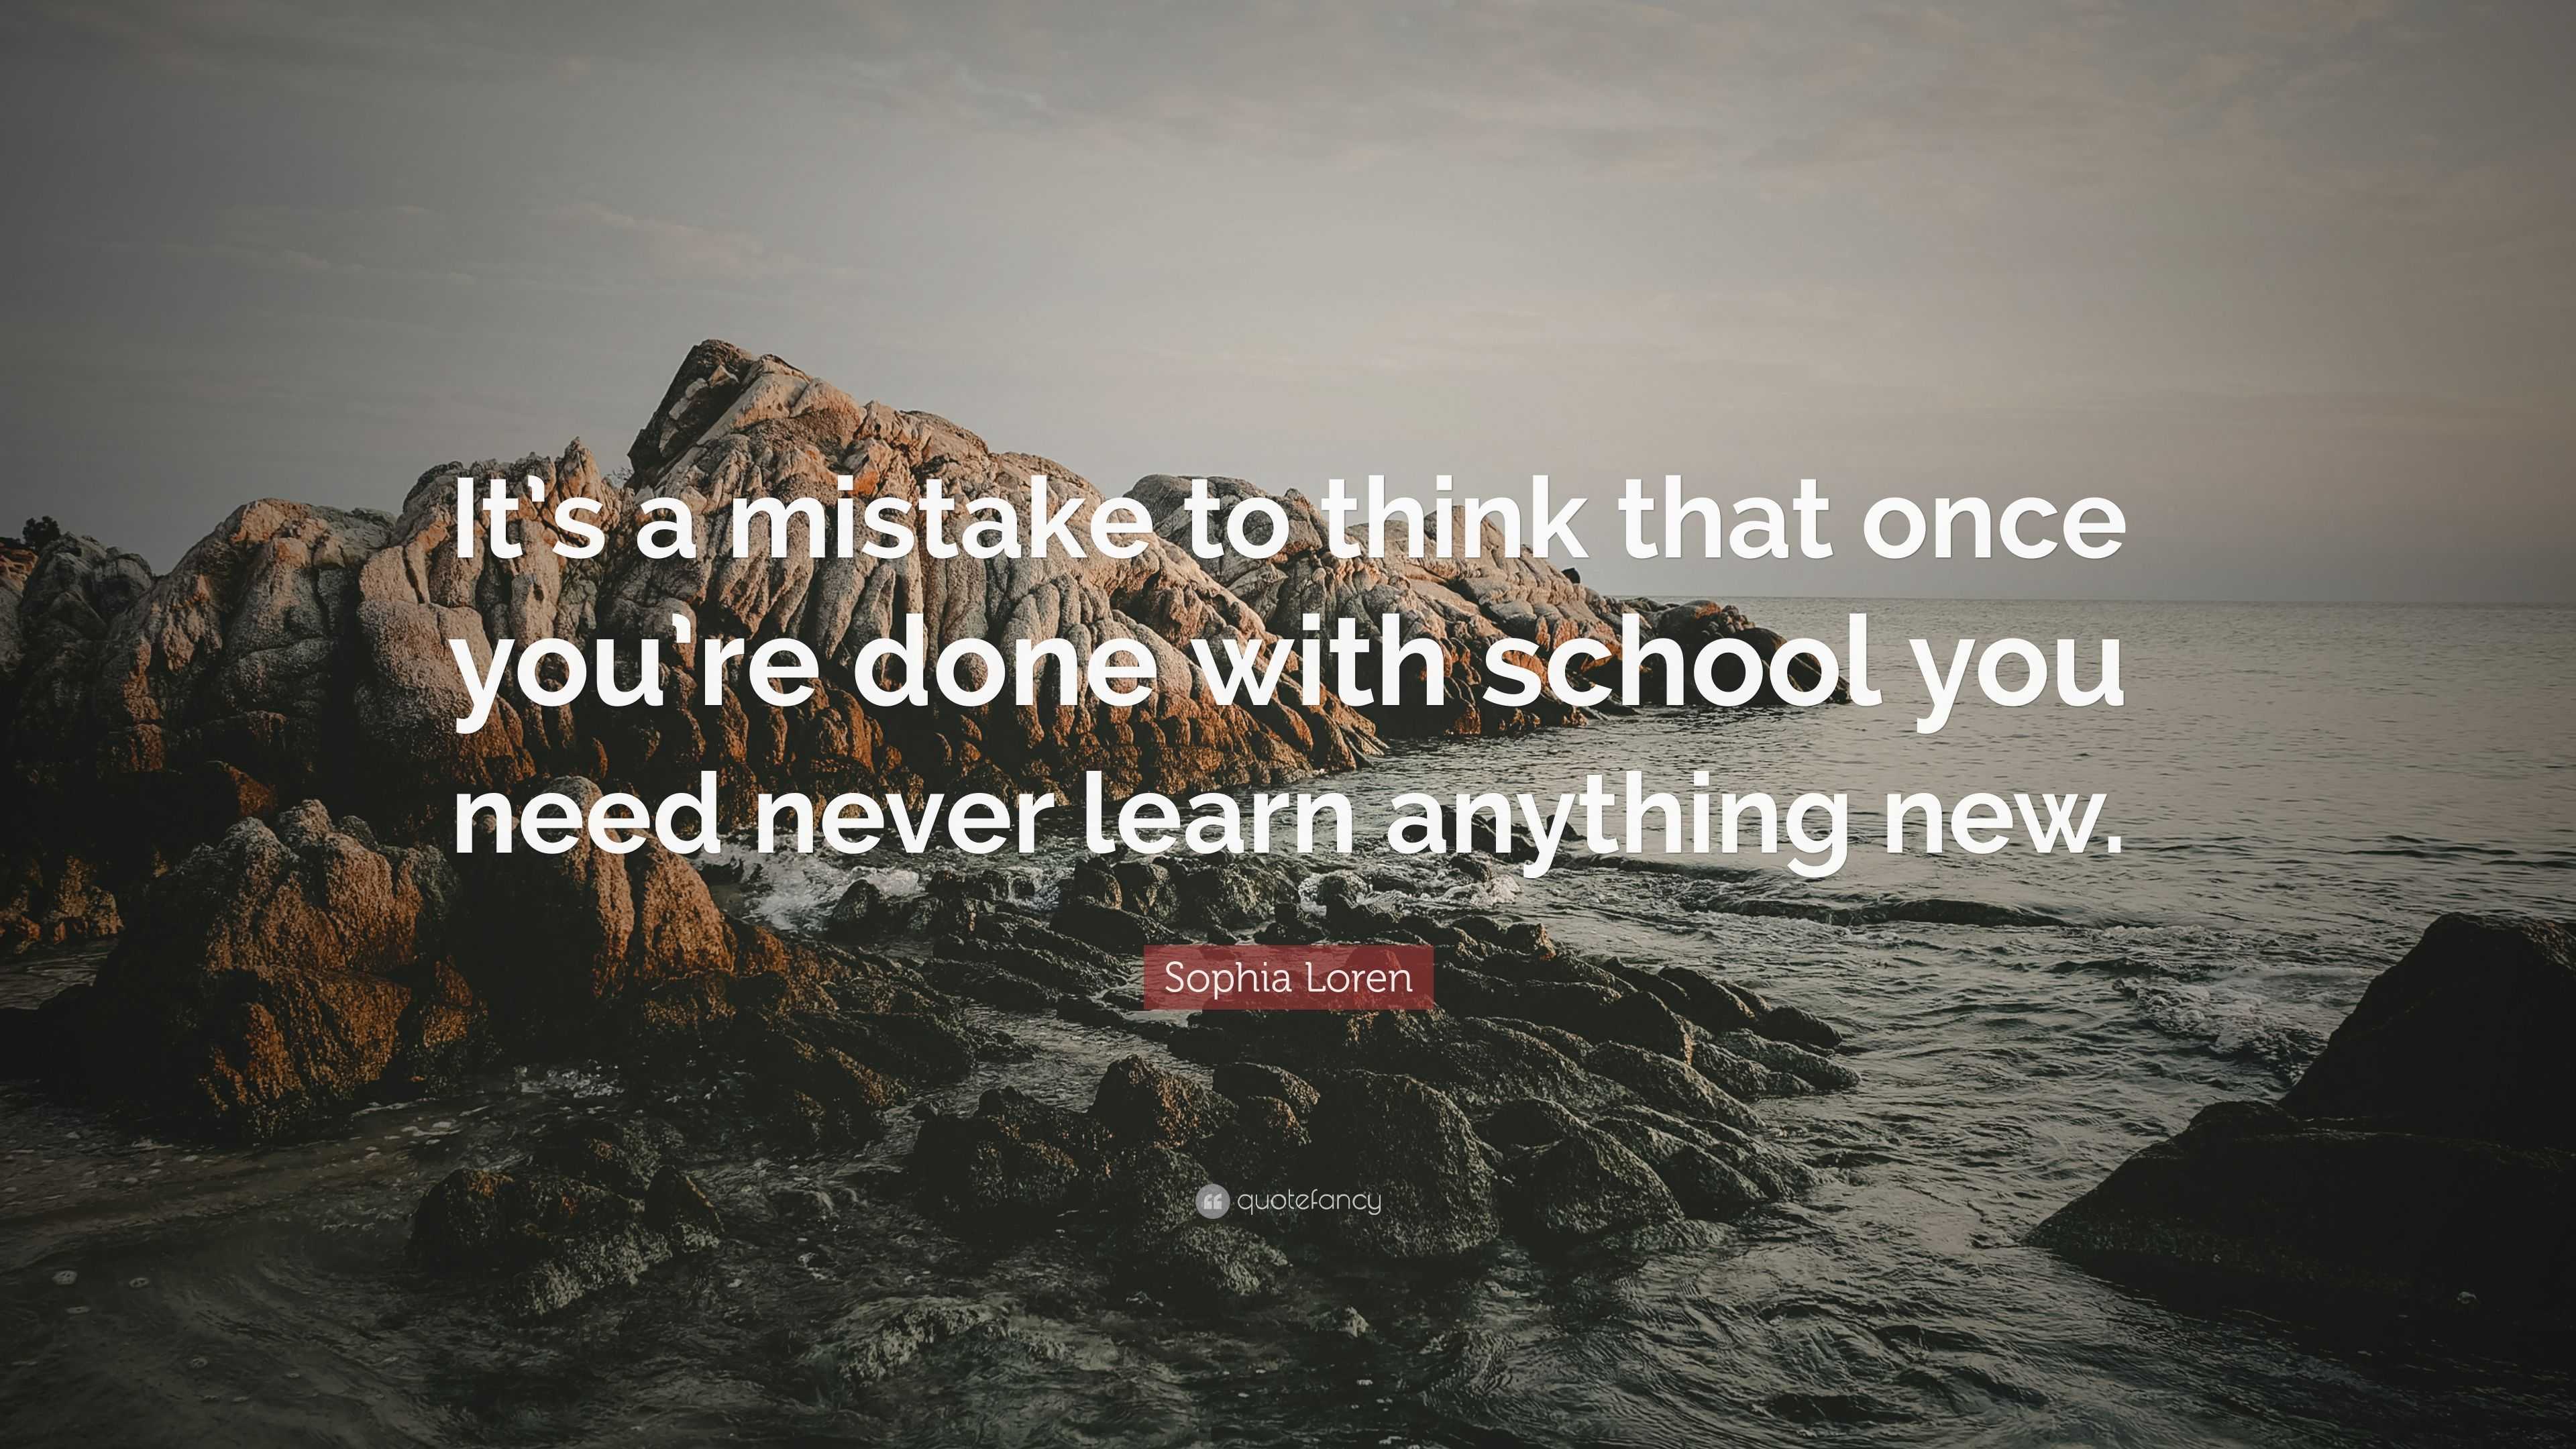 These wise words from Sophia Loren remind us that mistakes are an